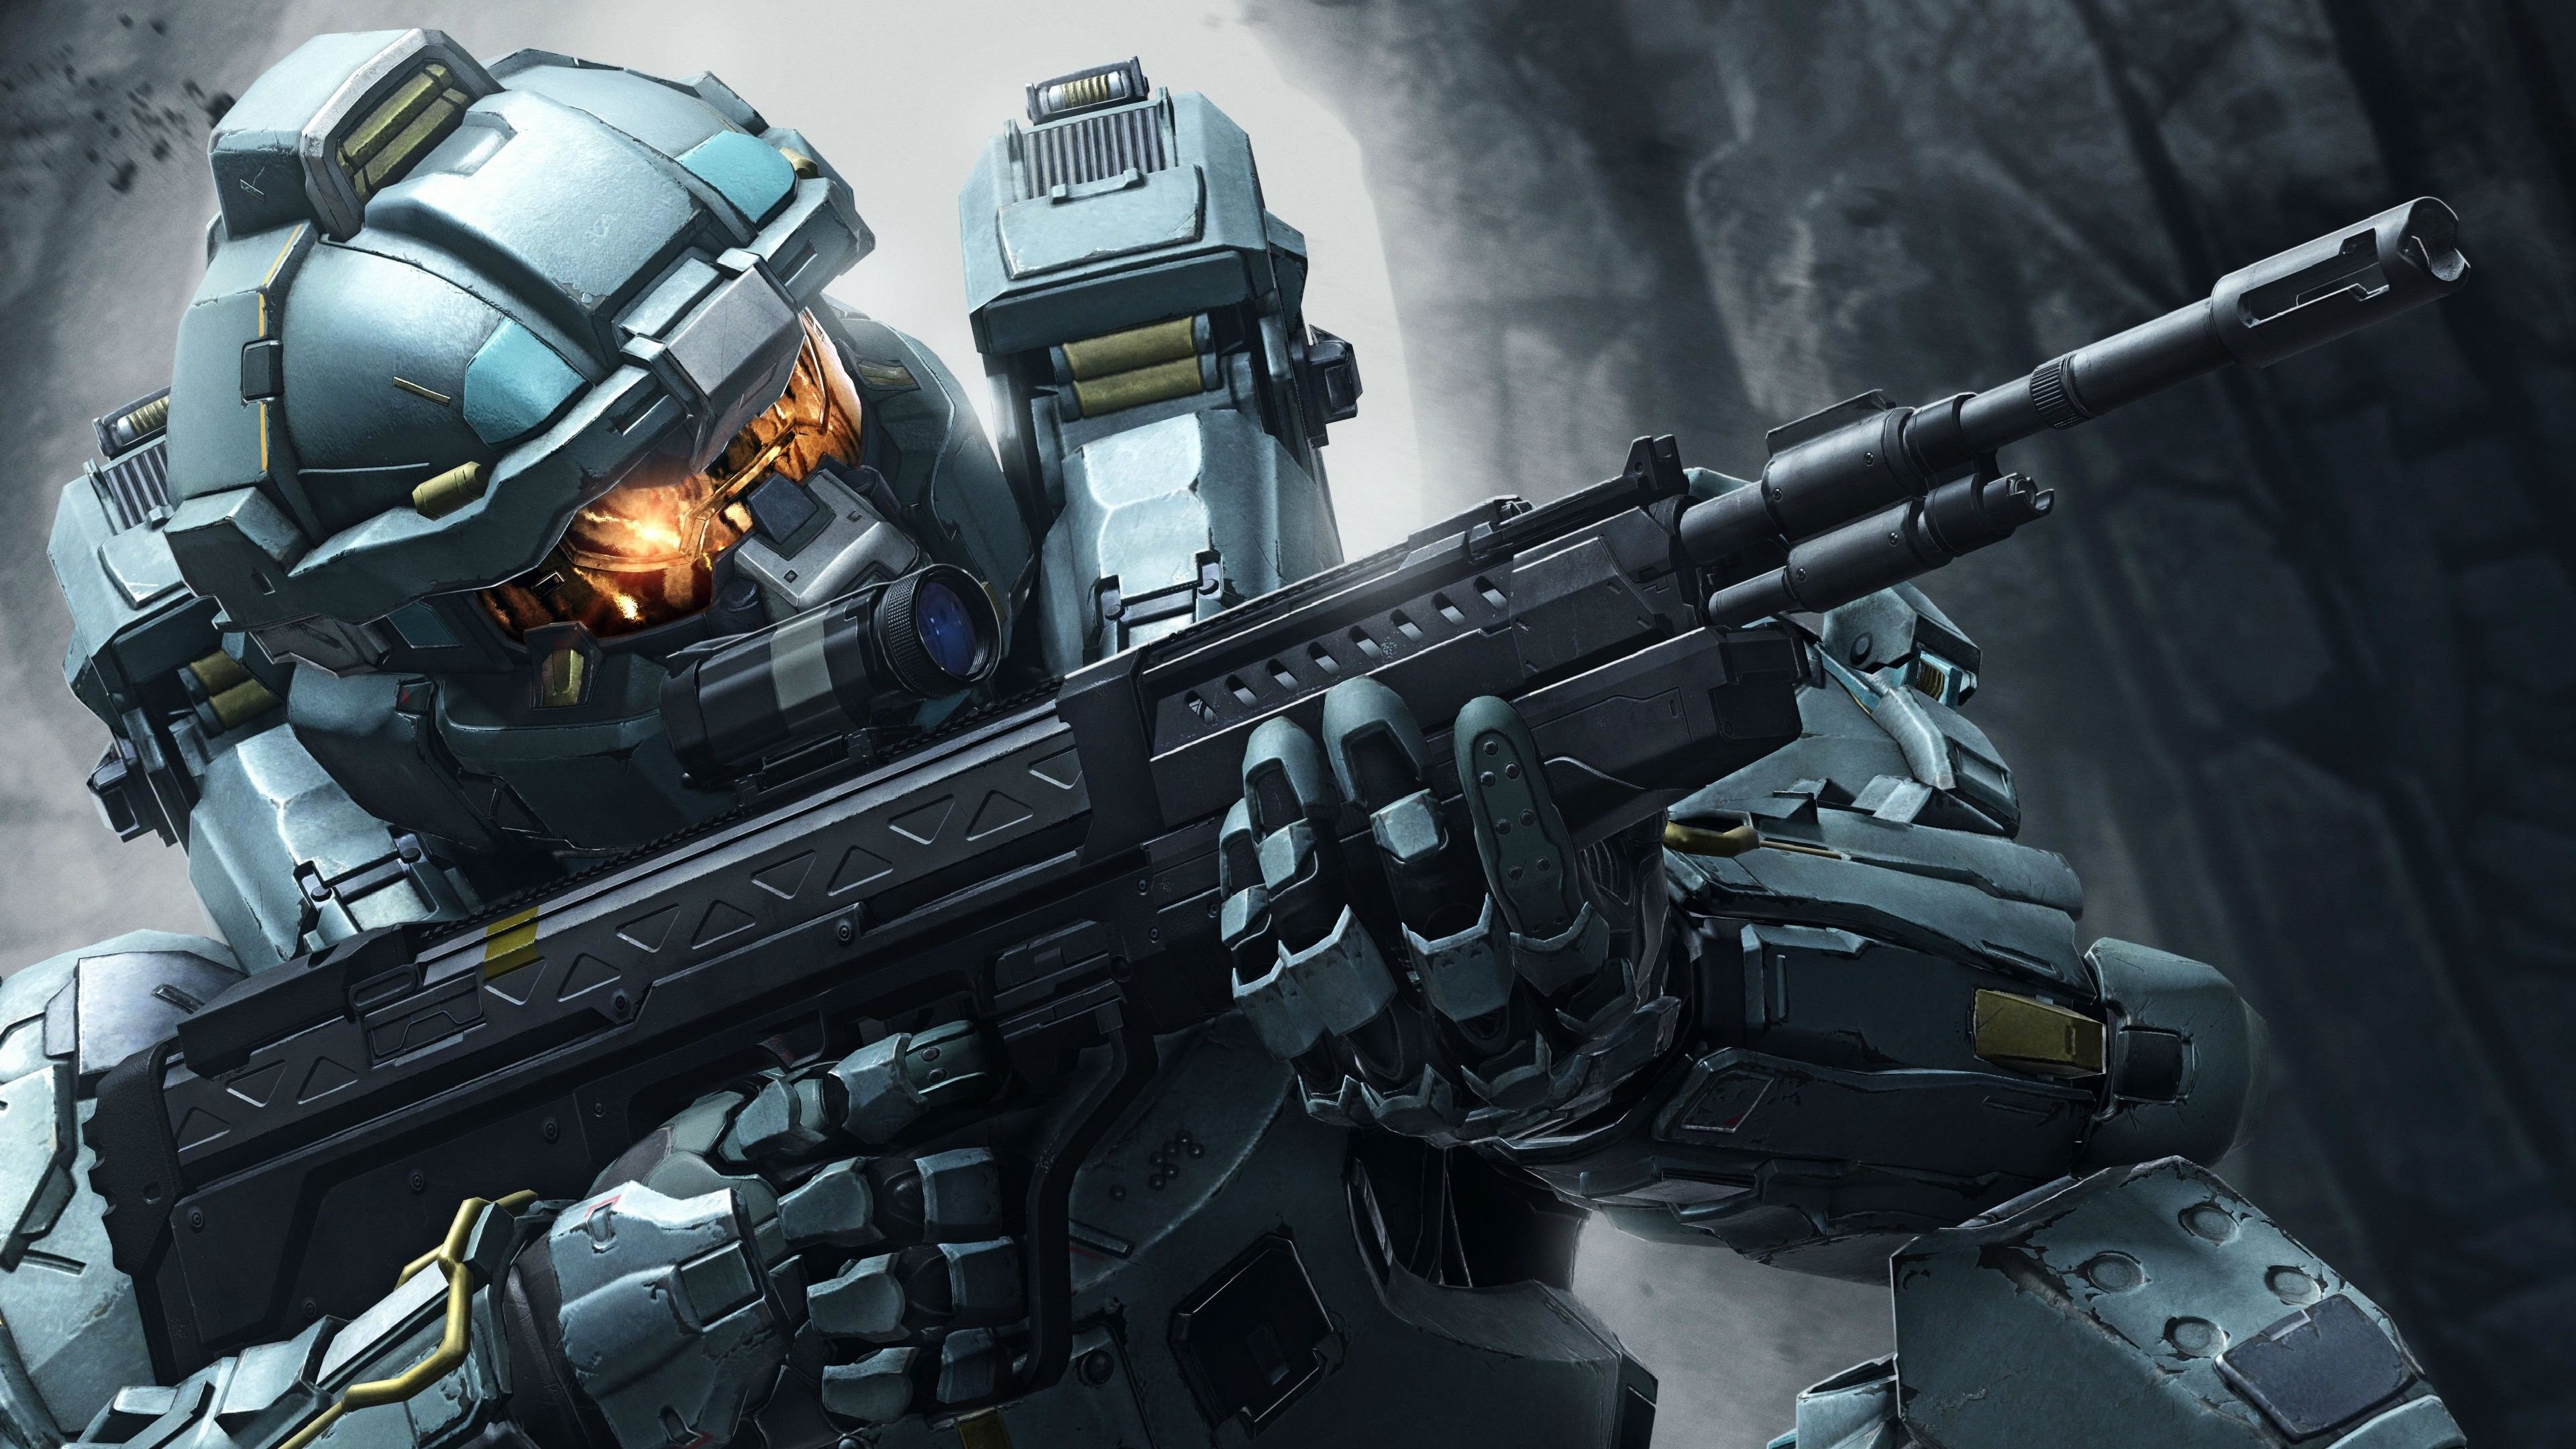 Fighting, Cyborg Windows, Shooter, Futuristic, Action, Abstract Wallpaper, Robot, Quotes, Scifi, halo, Fps, Warrior